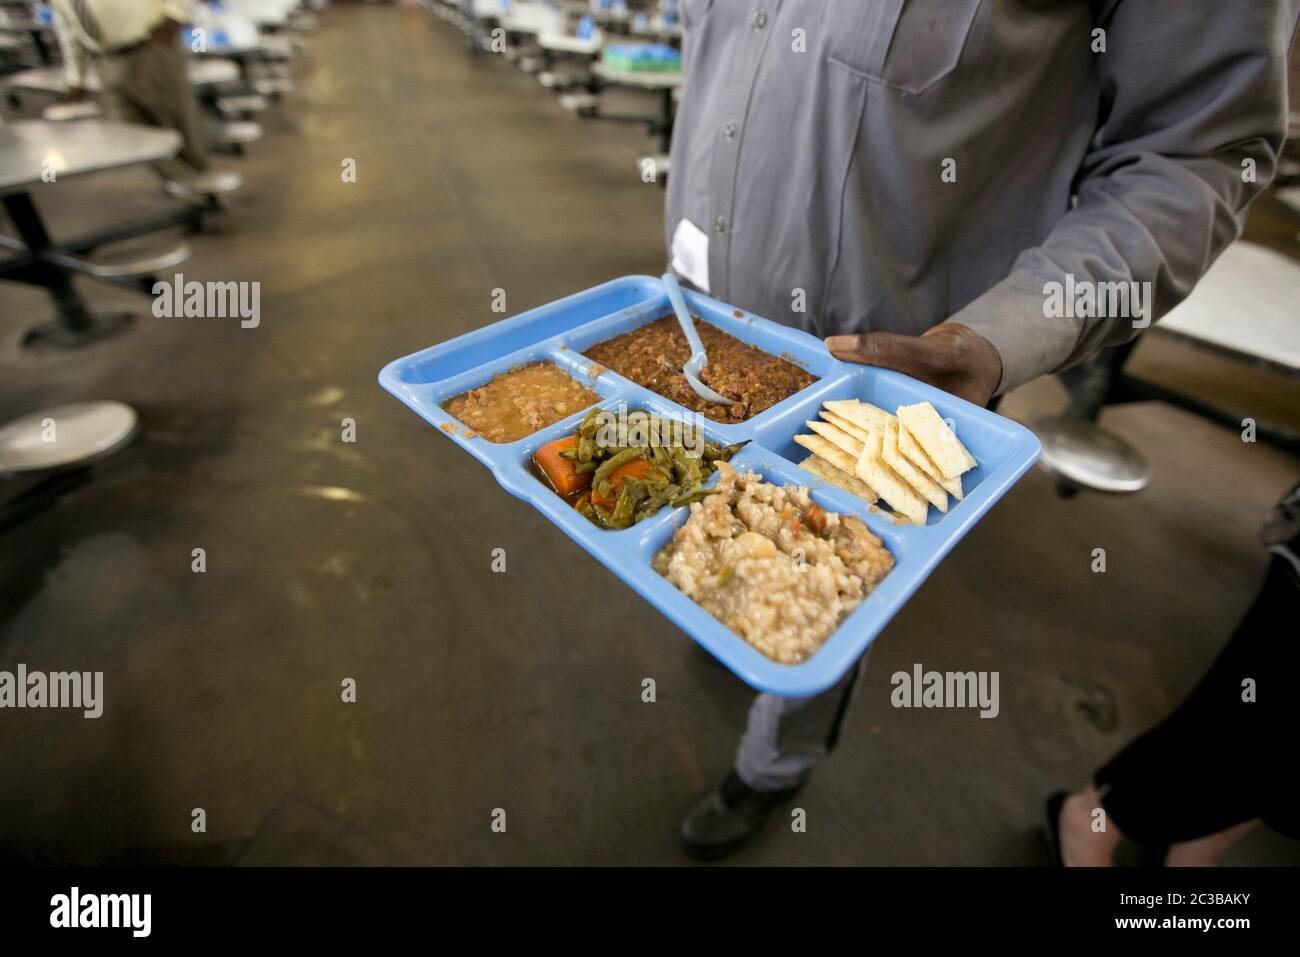 https://c8.alamy.com/comp/2C3BAKY/rosharon-texas-usa-august-25-2014-uniformed-male-guard-holds-a-plastic-tray-with-the-days-dinner-offering-at-the-high-security-darrington-prisons-cafeteria-marjorie-kamys-coteradaemmrich-photography-2C3BAKY.jpg